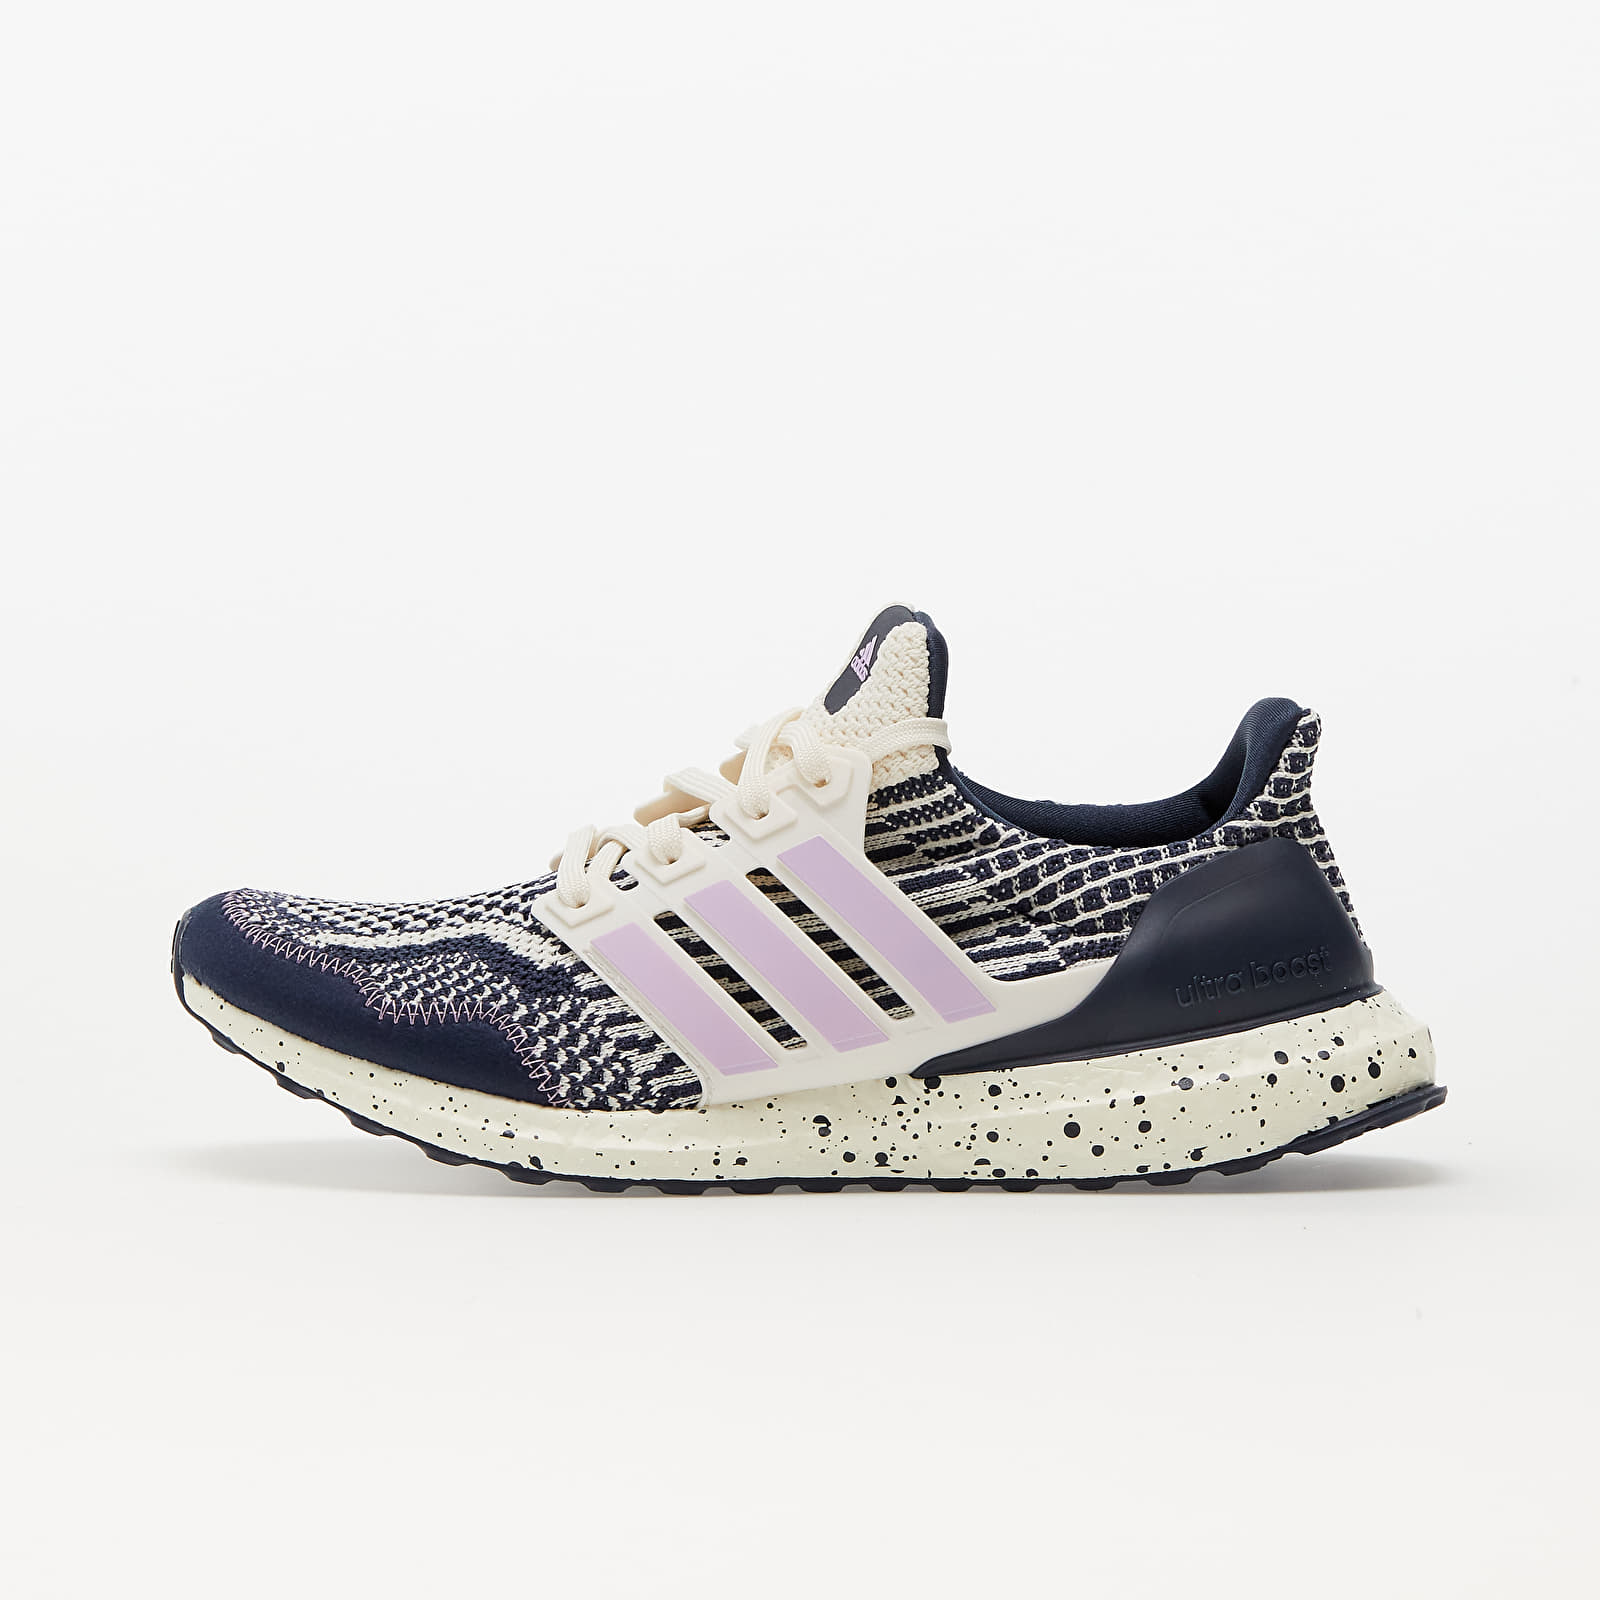 Women's shoes adidas UltraBOOST 5.0 Dna Core White/ Blitz Lilac/ Shale Navy